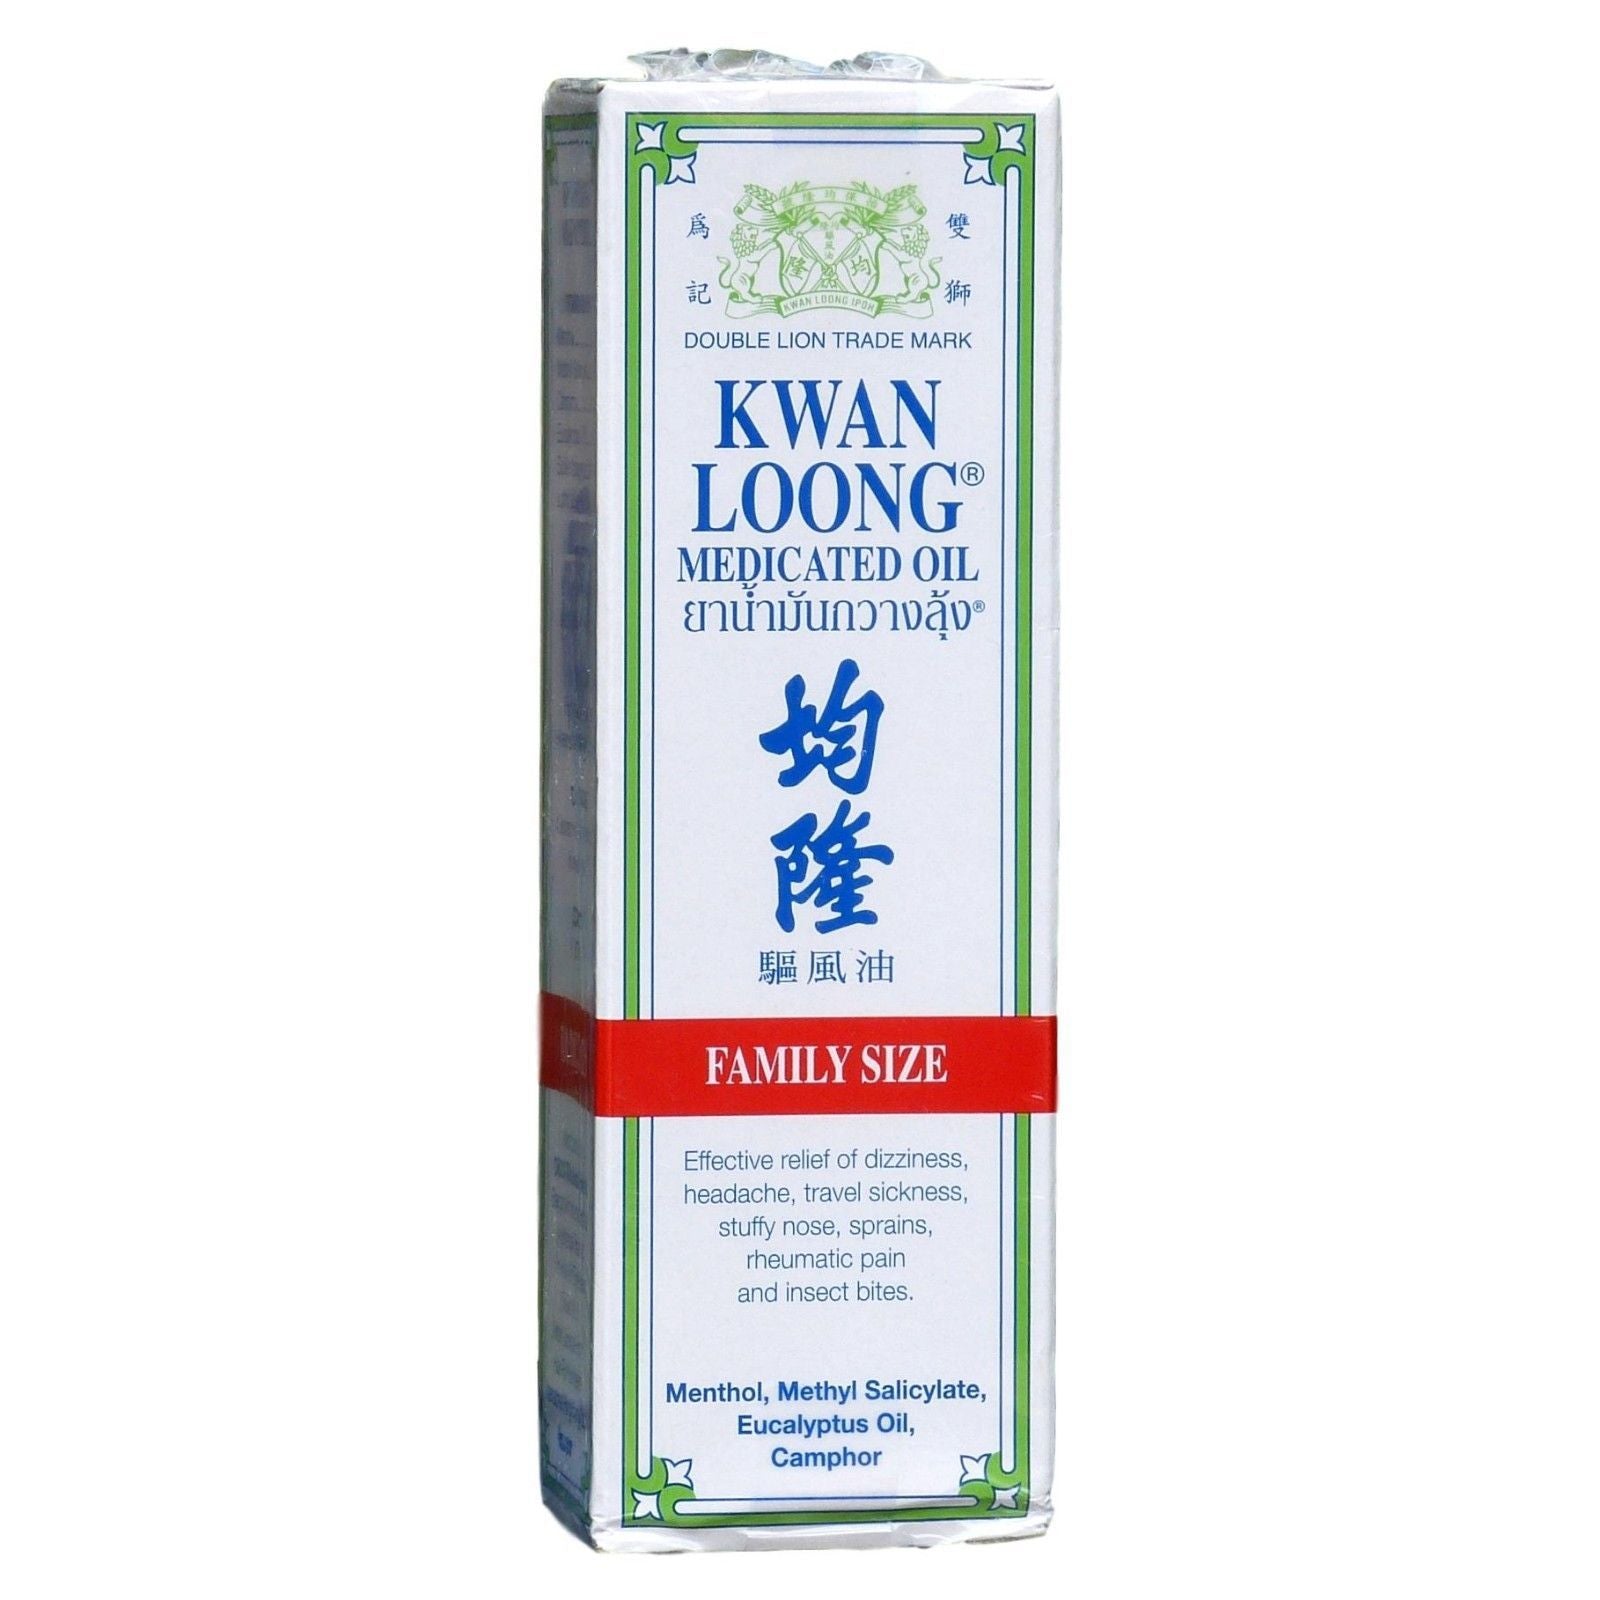 Kwan Loong Medicated Oil Muscle Aches Pain Stuffy Nose Insect Bites 57ml